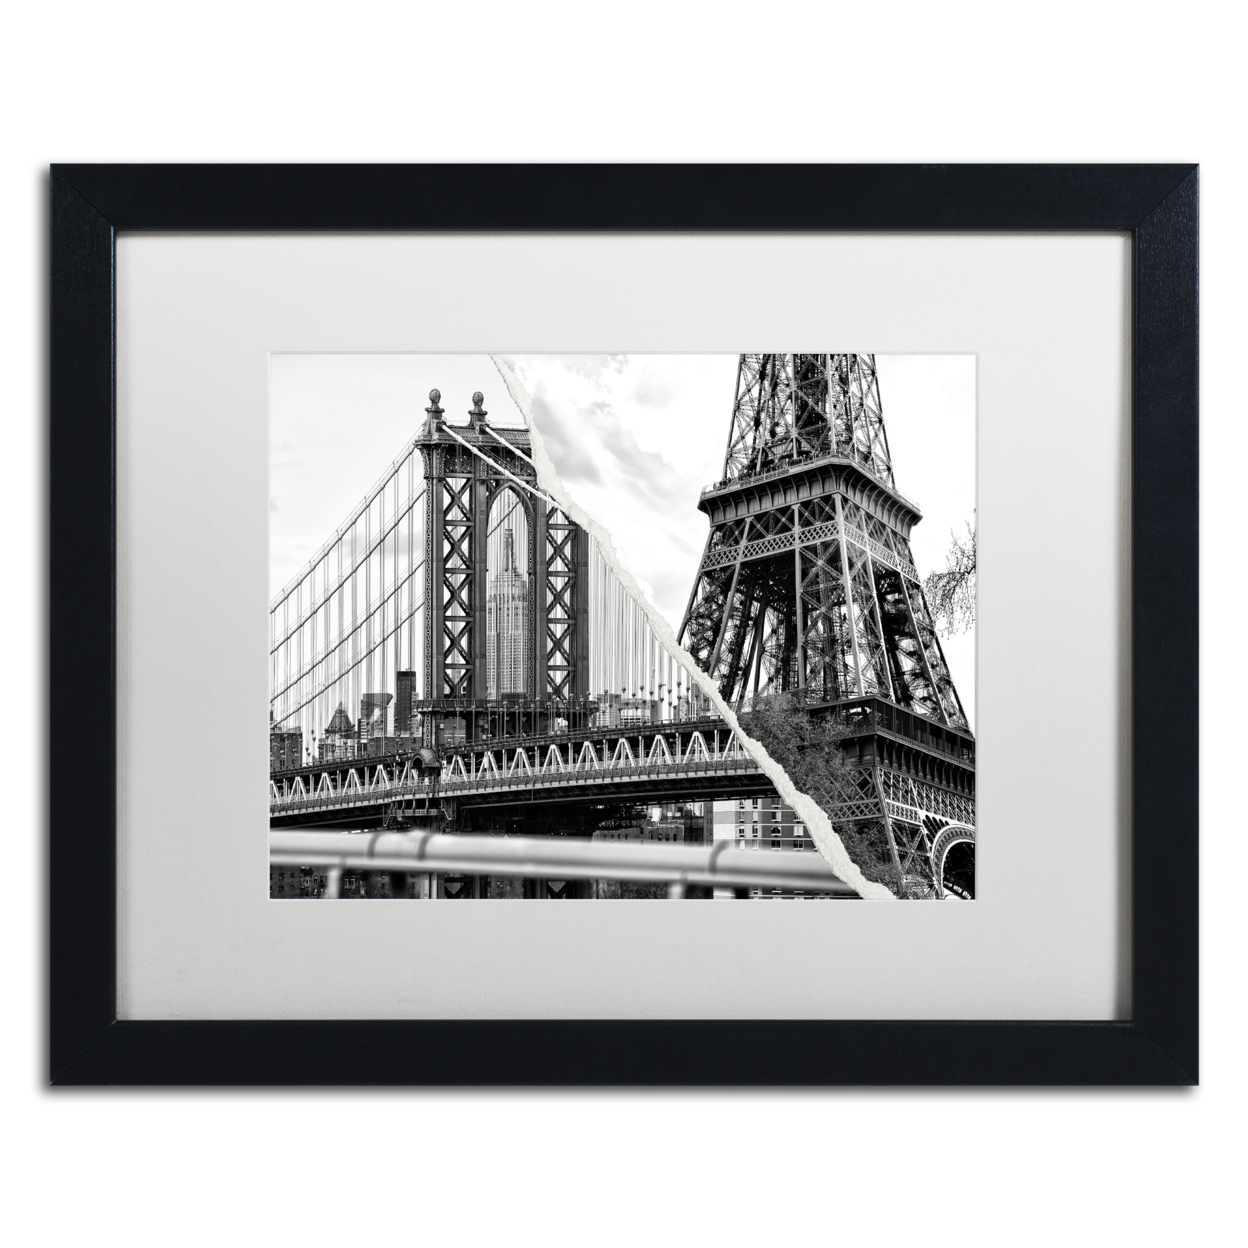 Philippe Hugonnard 'The Tower And The Bridge' Black Wooden Framed Art 18 X 22 Inches